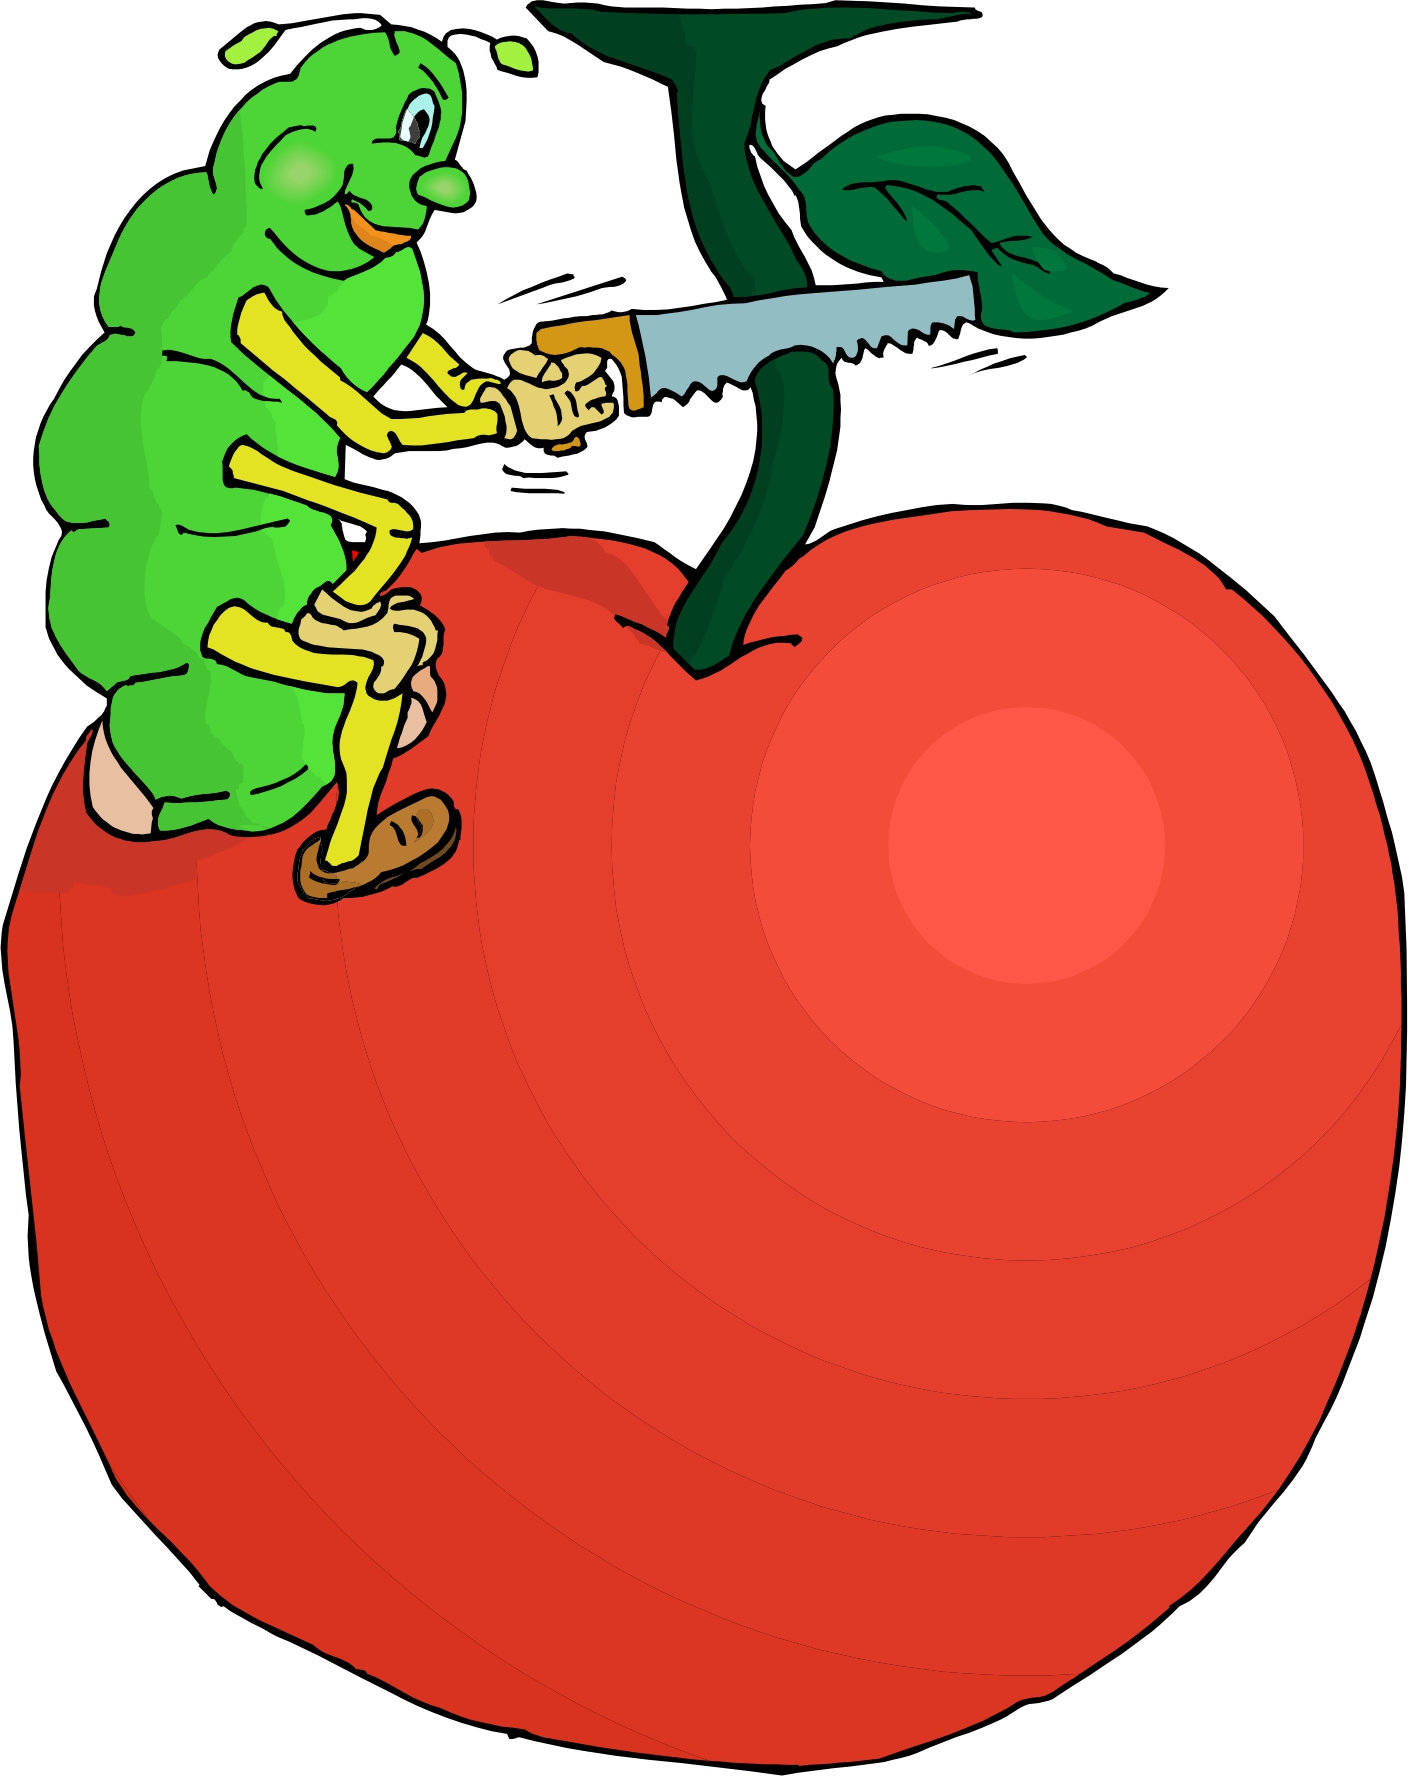 apple picking clipart - photo #33